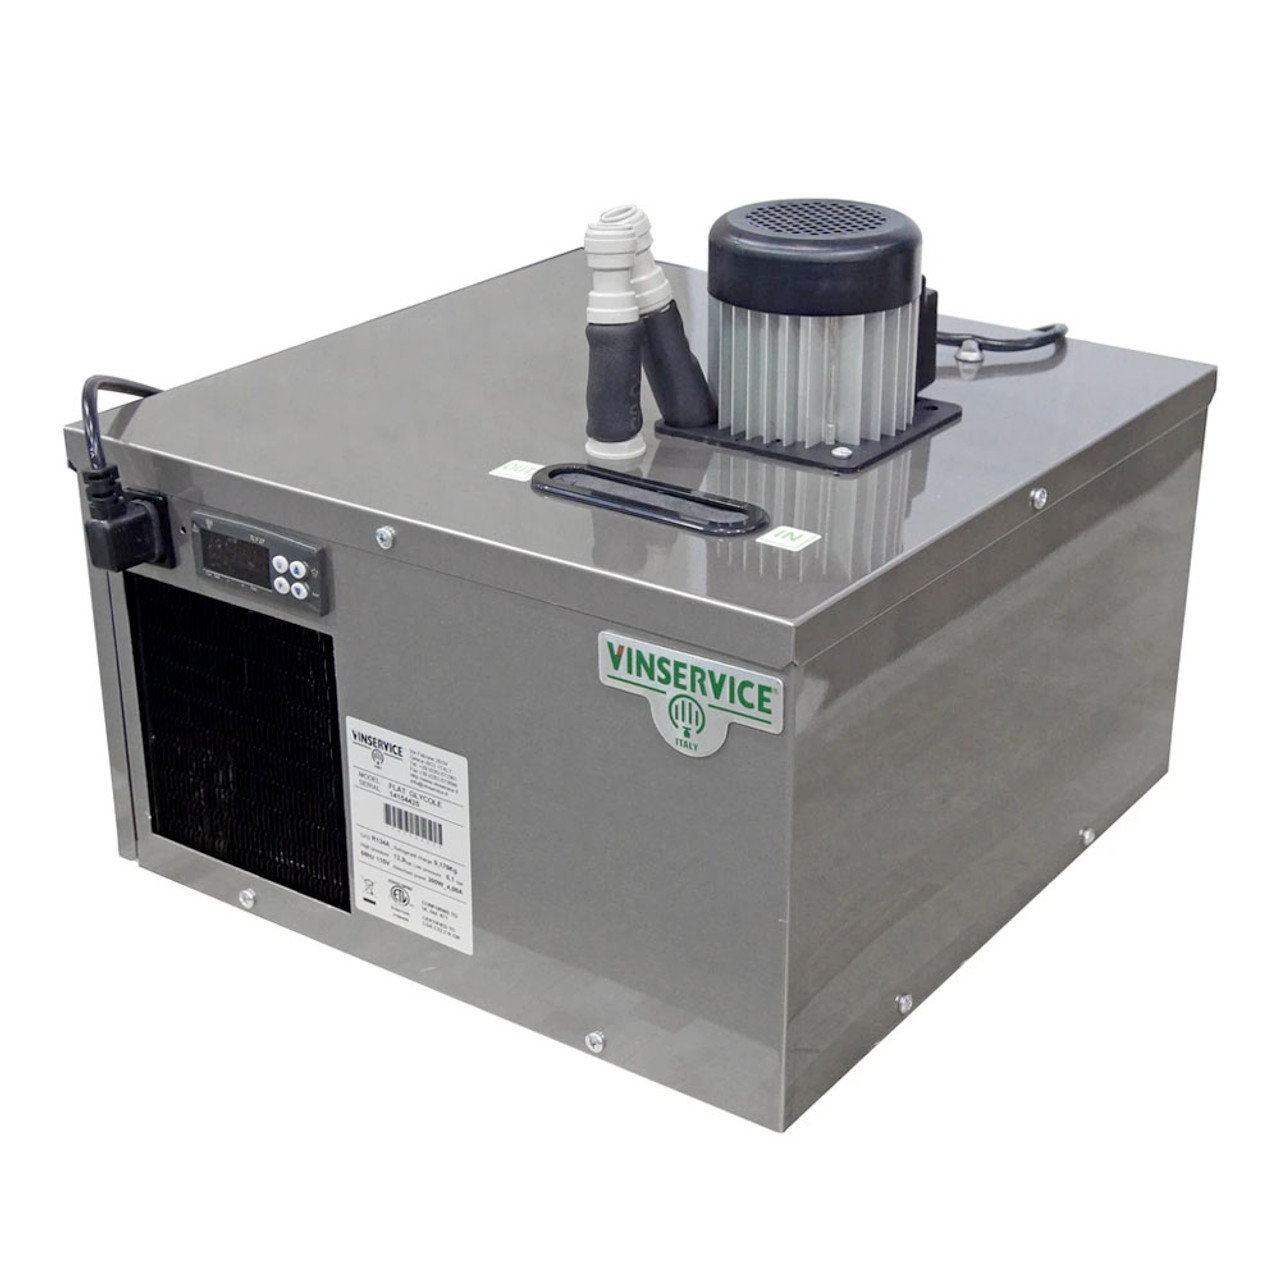 https://cdn11.bigcommerce.com/s-cznxq08r7/images/stencil/1280x1280/products/4559/12041/BB989950-Vinservice_Glycol_Chiller_1__28250.1601496137.jpg?c=1